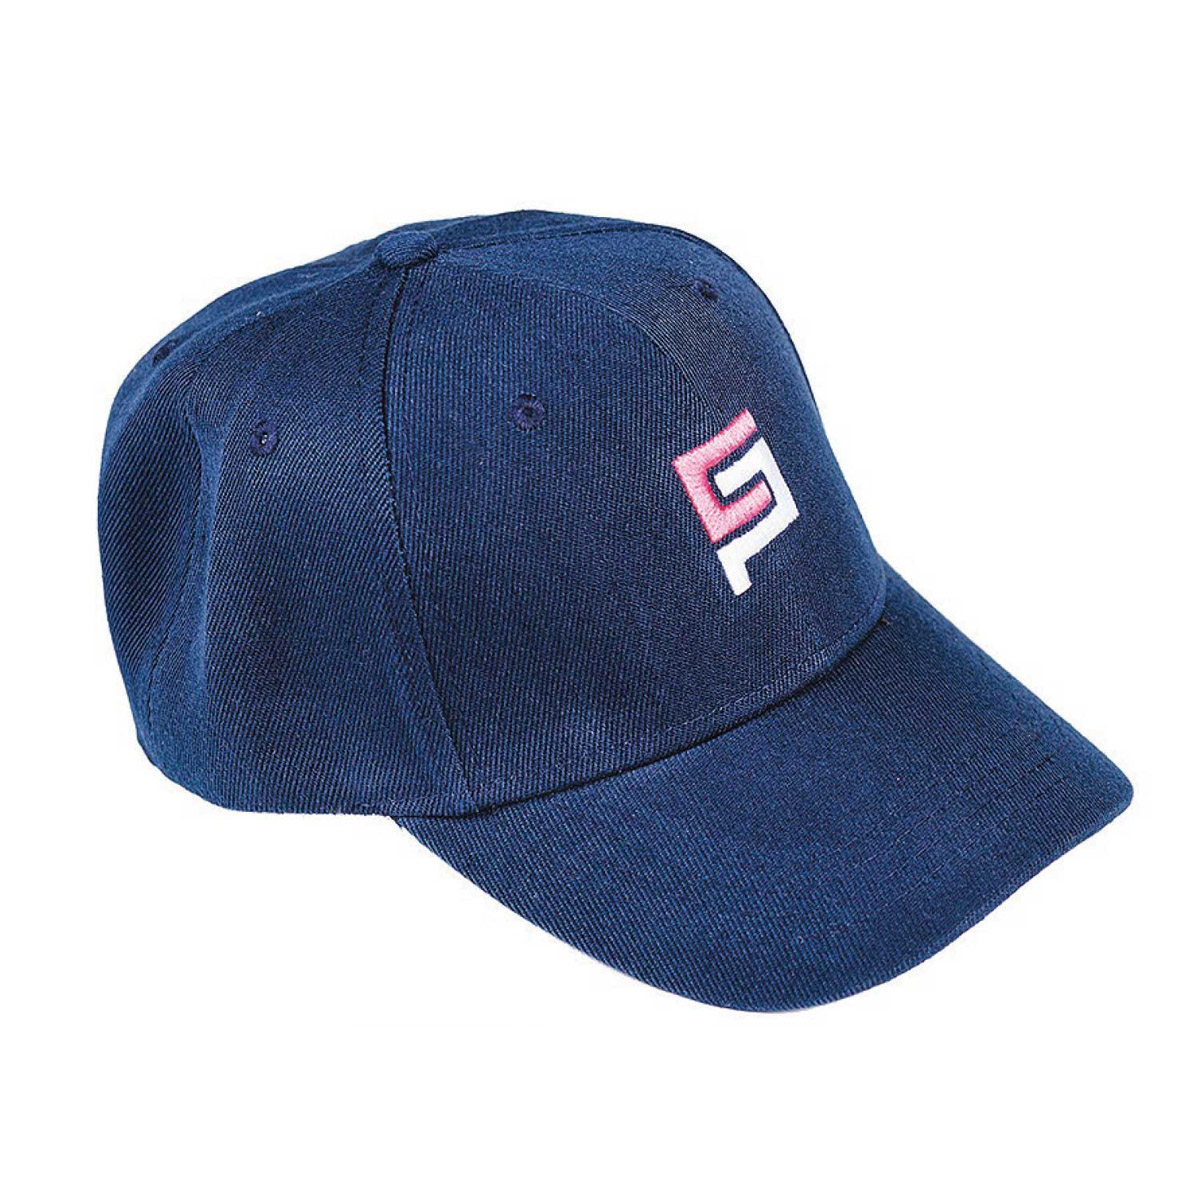 Ceramic Pro Brand Navy Blue Baseball Cap with Embroidered Logo